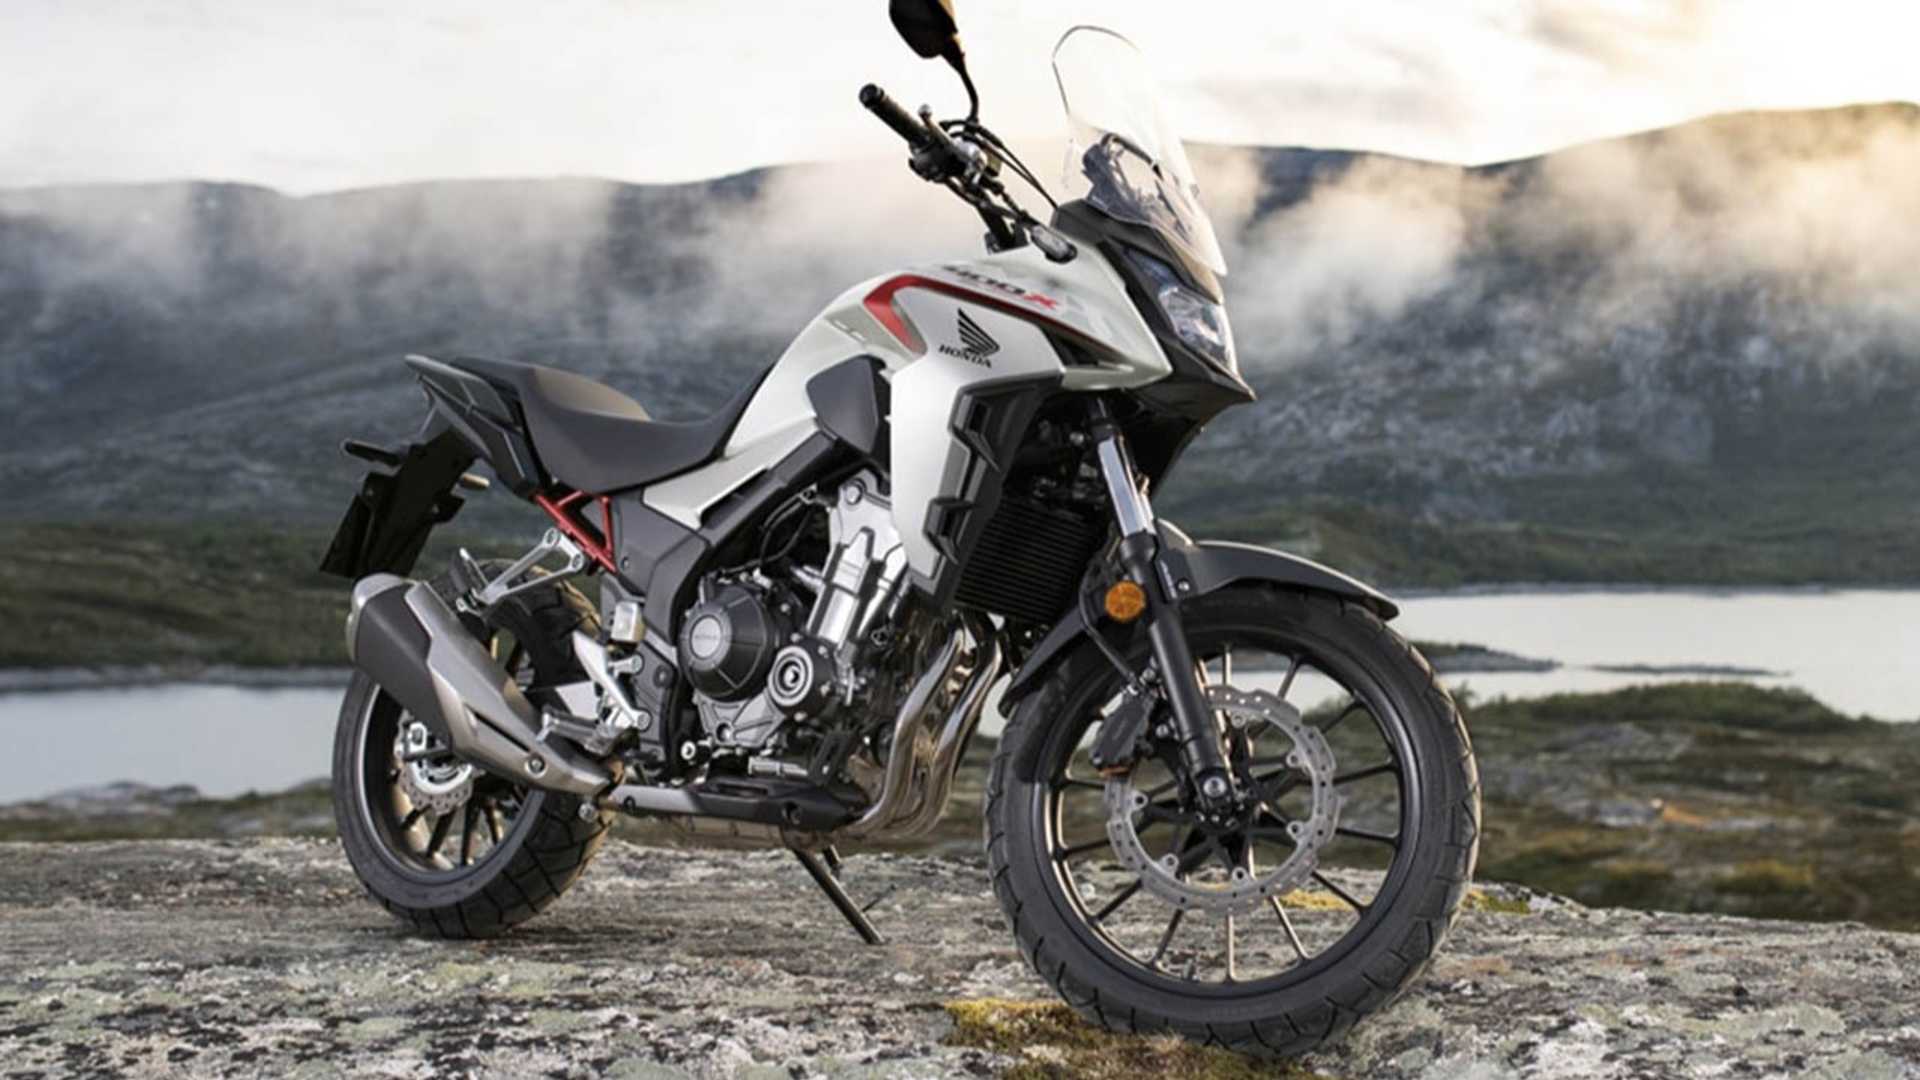 New little ADV motorcycle from Honda